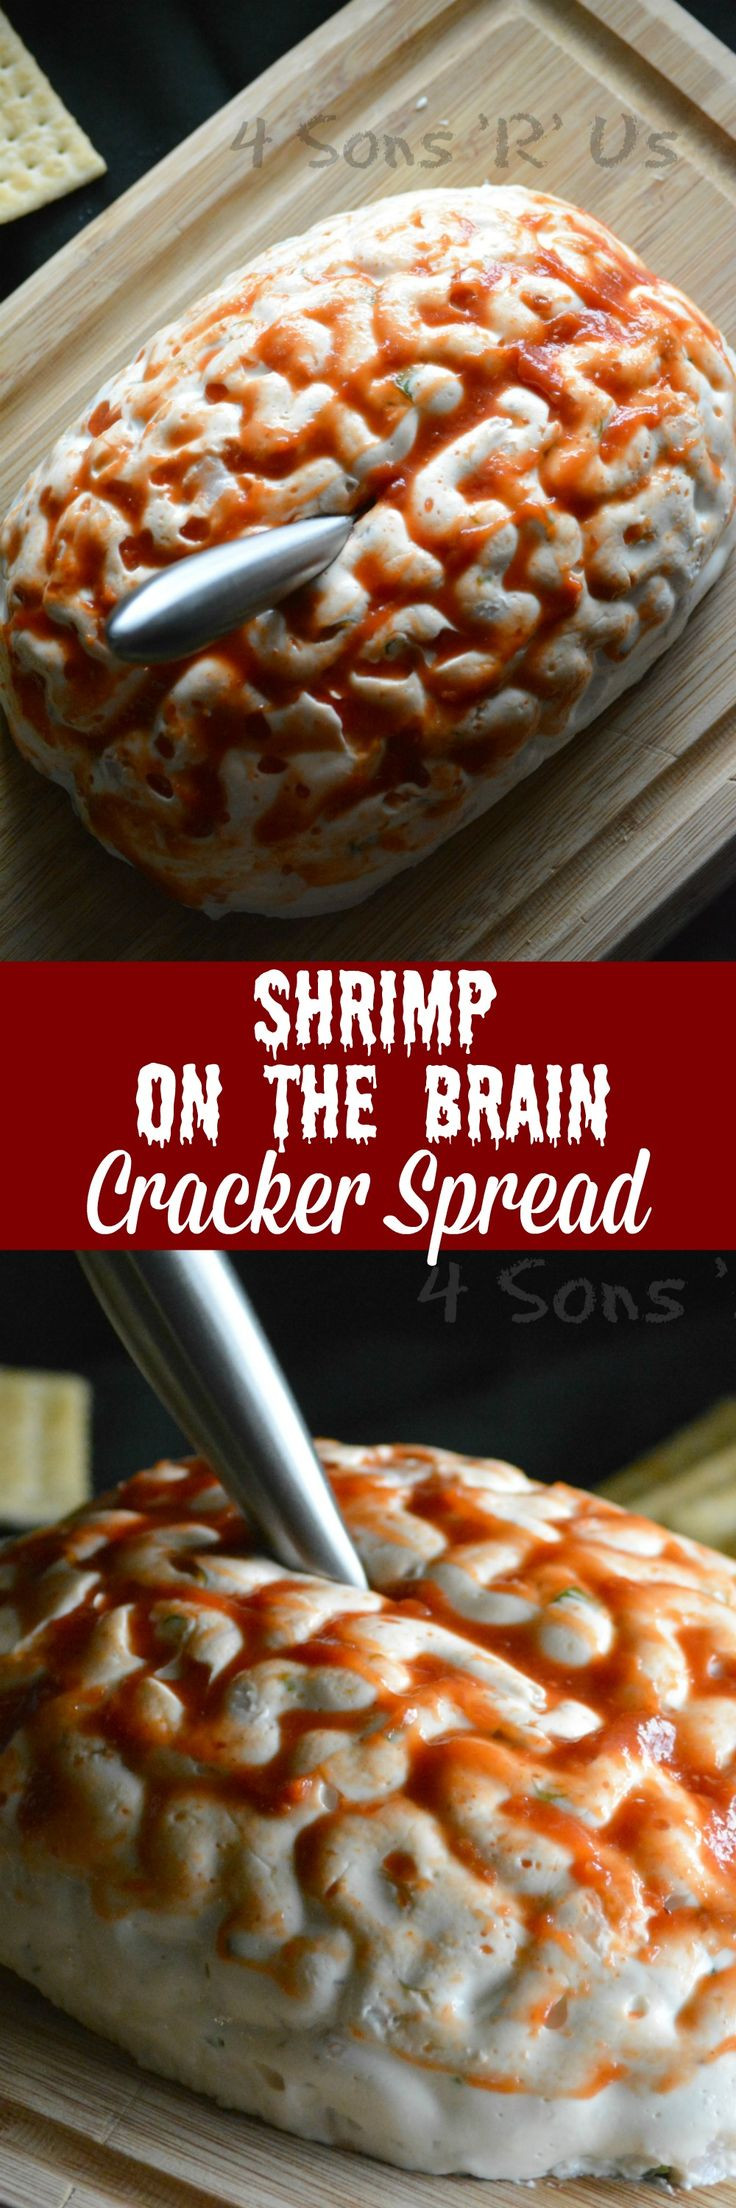 Halloween Dips And Spreads
 Best 25 Shrimp dip ideas only on Pinterest